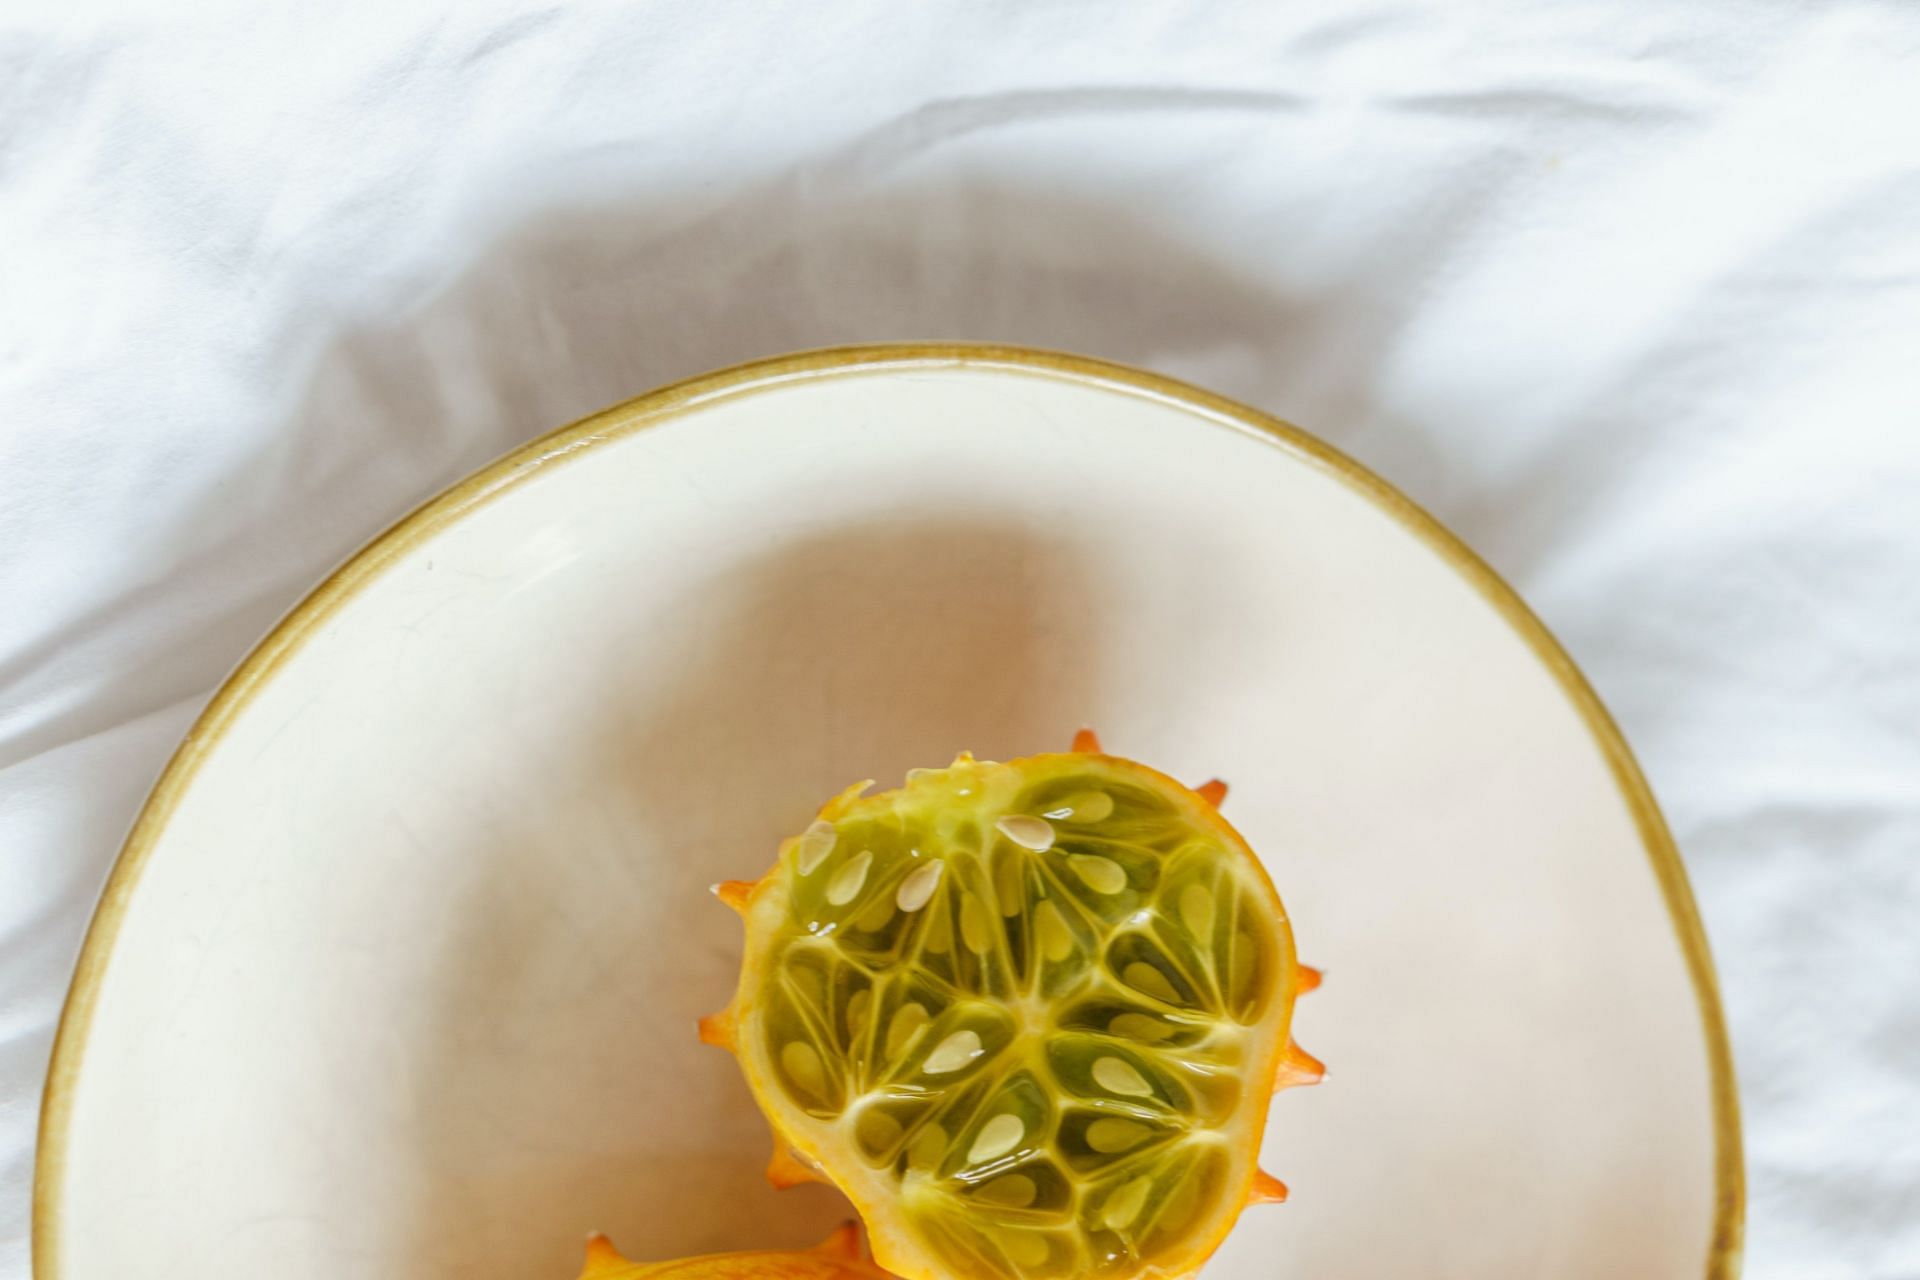 Horned Melon high vitamin C content can boost immunity and promote healthy skin.(Image via Pexels)